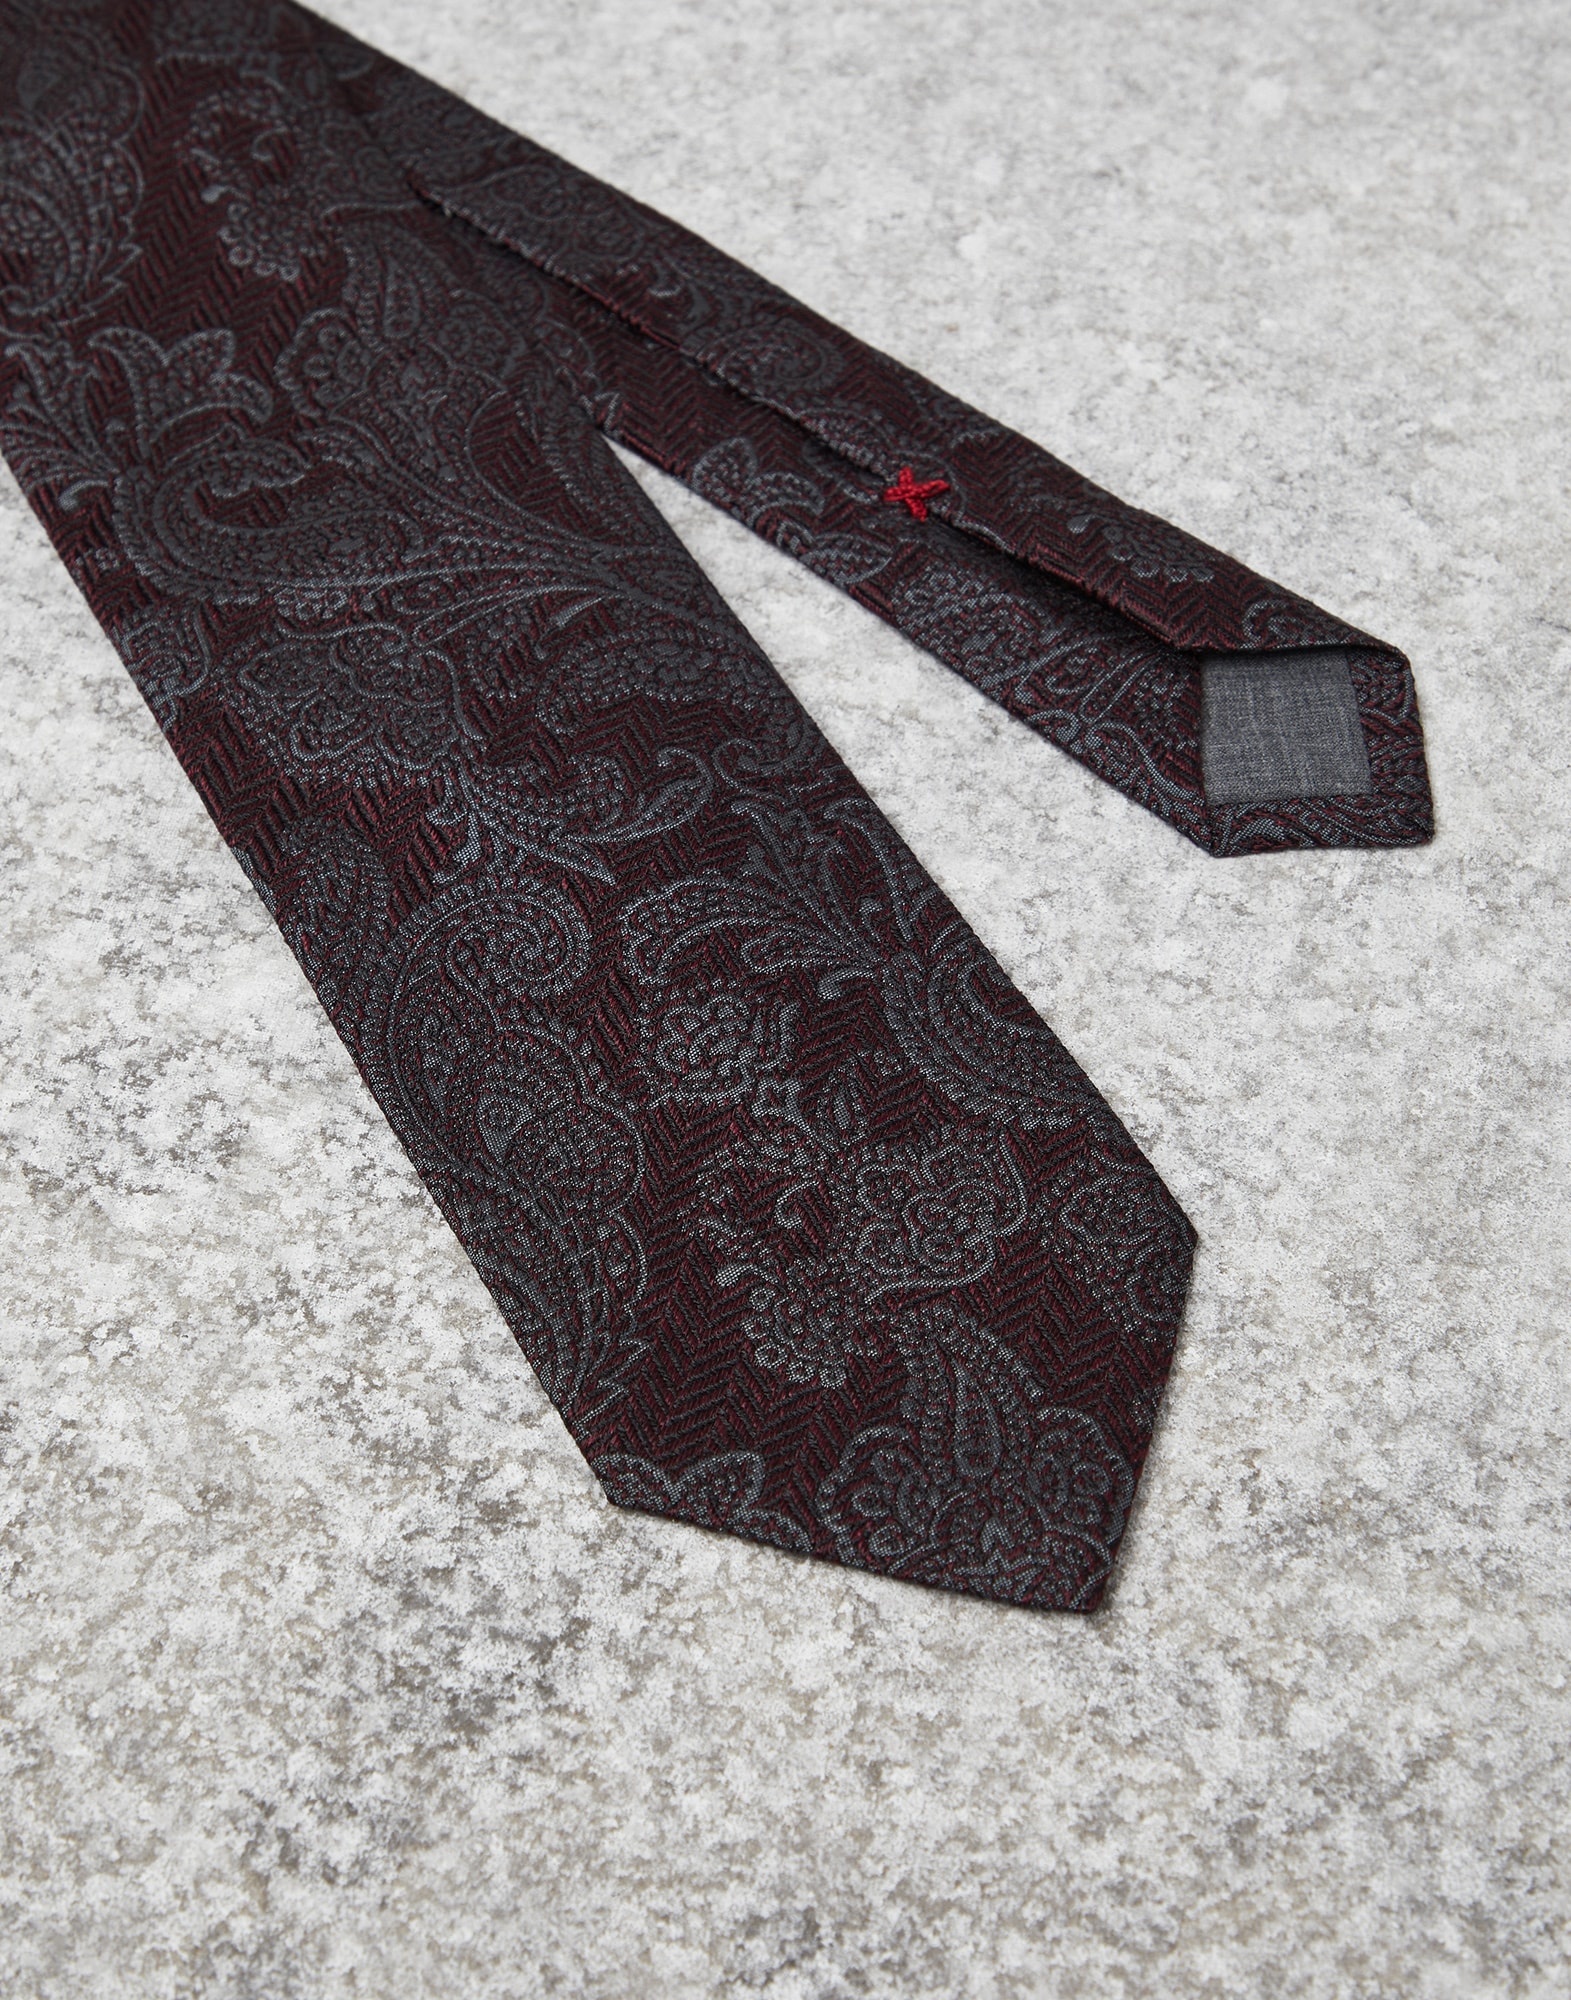 Silk and virgin wool tie with paisley design - 2